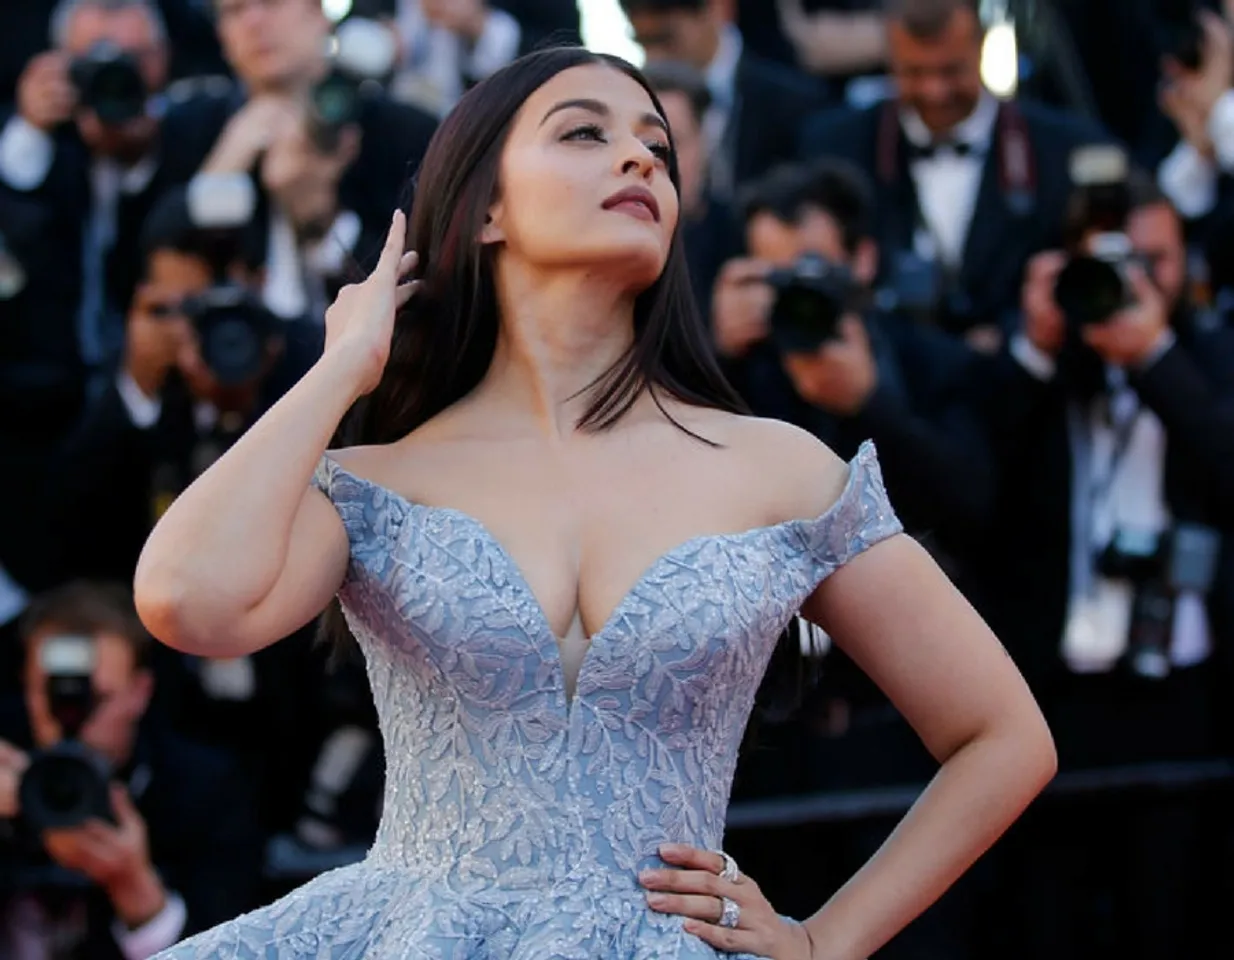 AISHWARYA RAI BACHCHAN TO BE FELICITATED AT INDIAN FILM FESTIVAL OF MELBOURNE